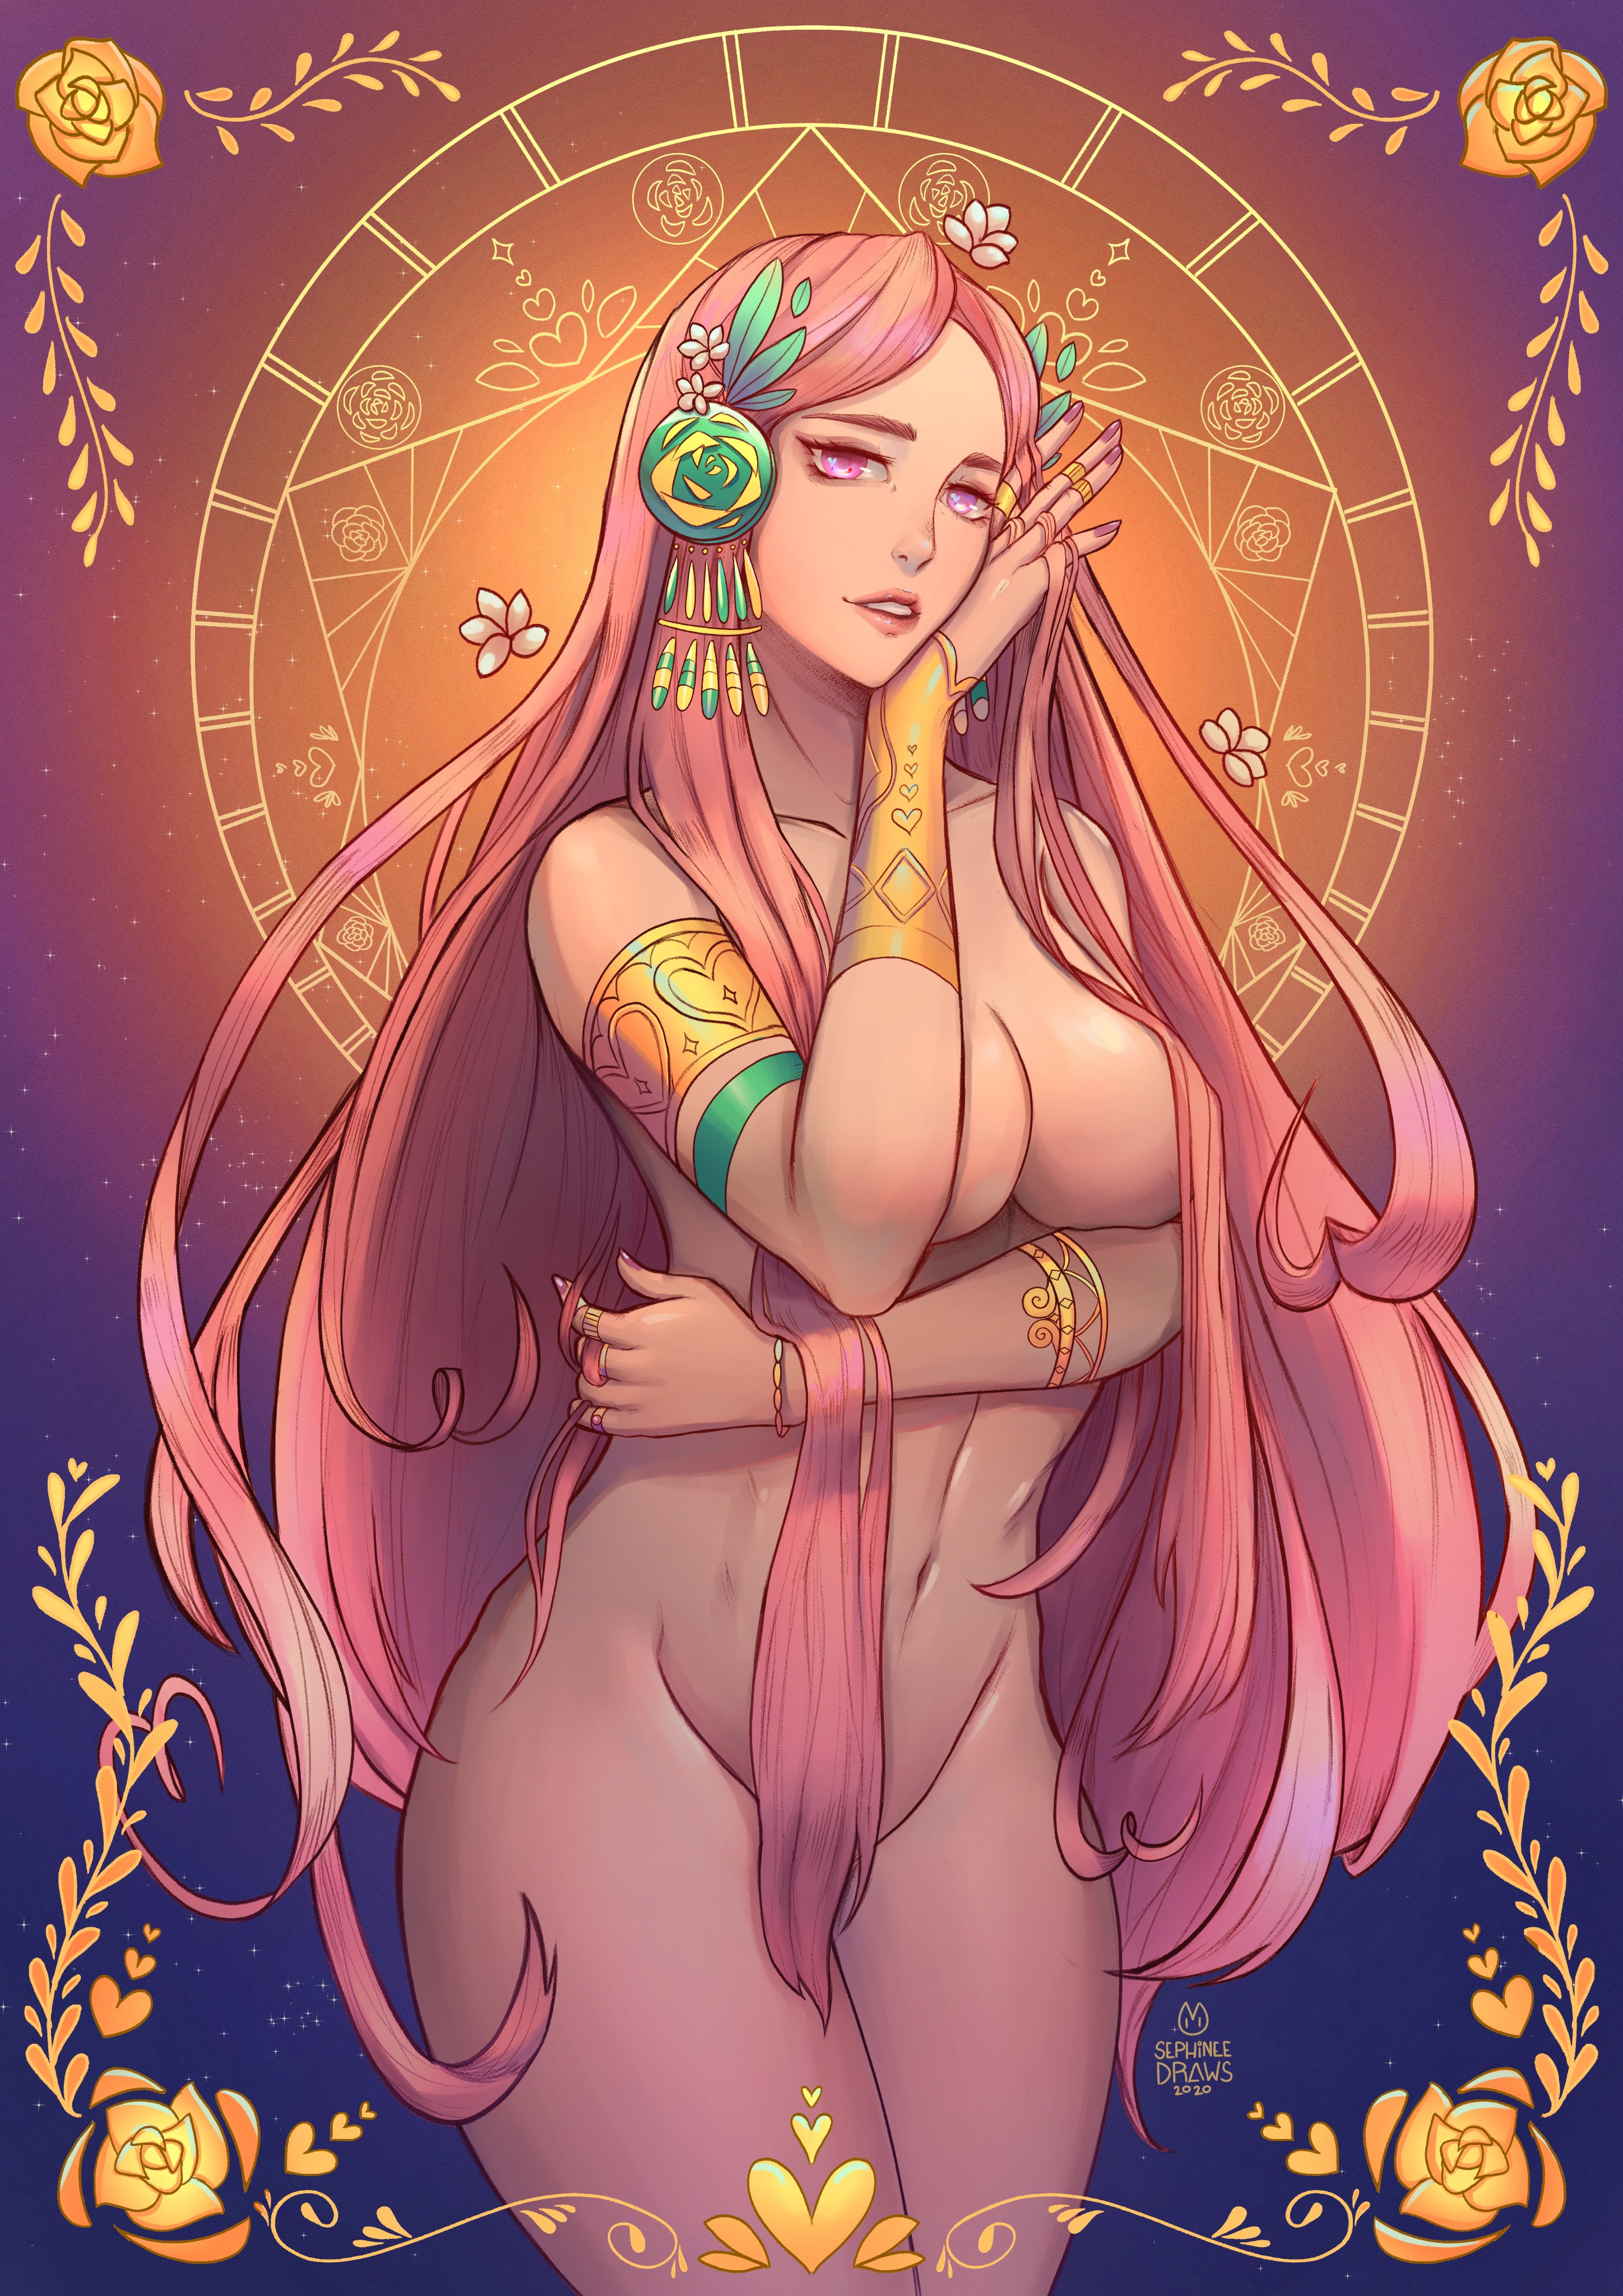 Here's Aphrodite from the game Hades which just came out of early acce...